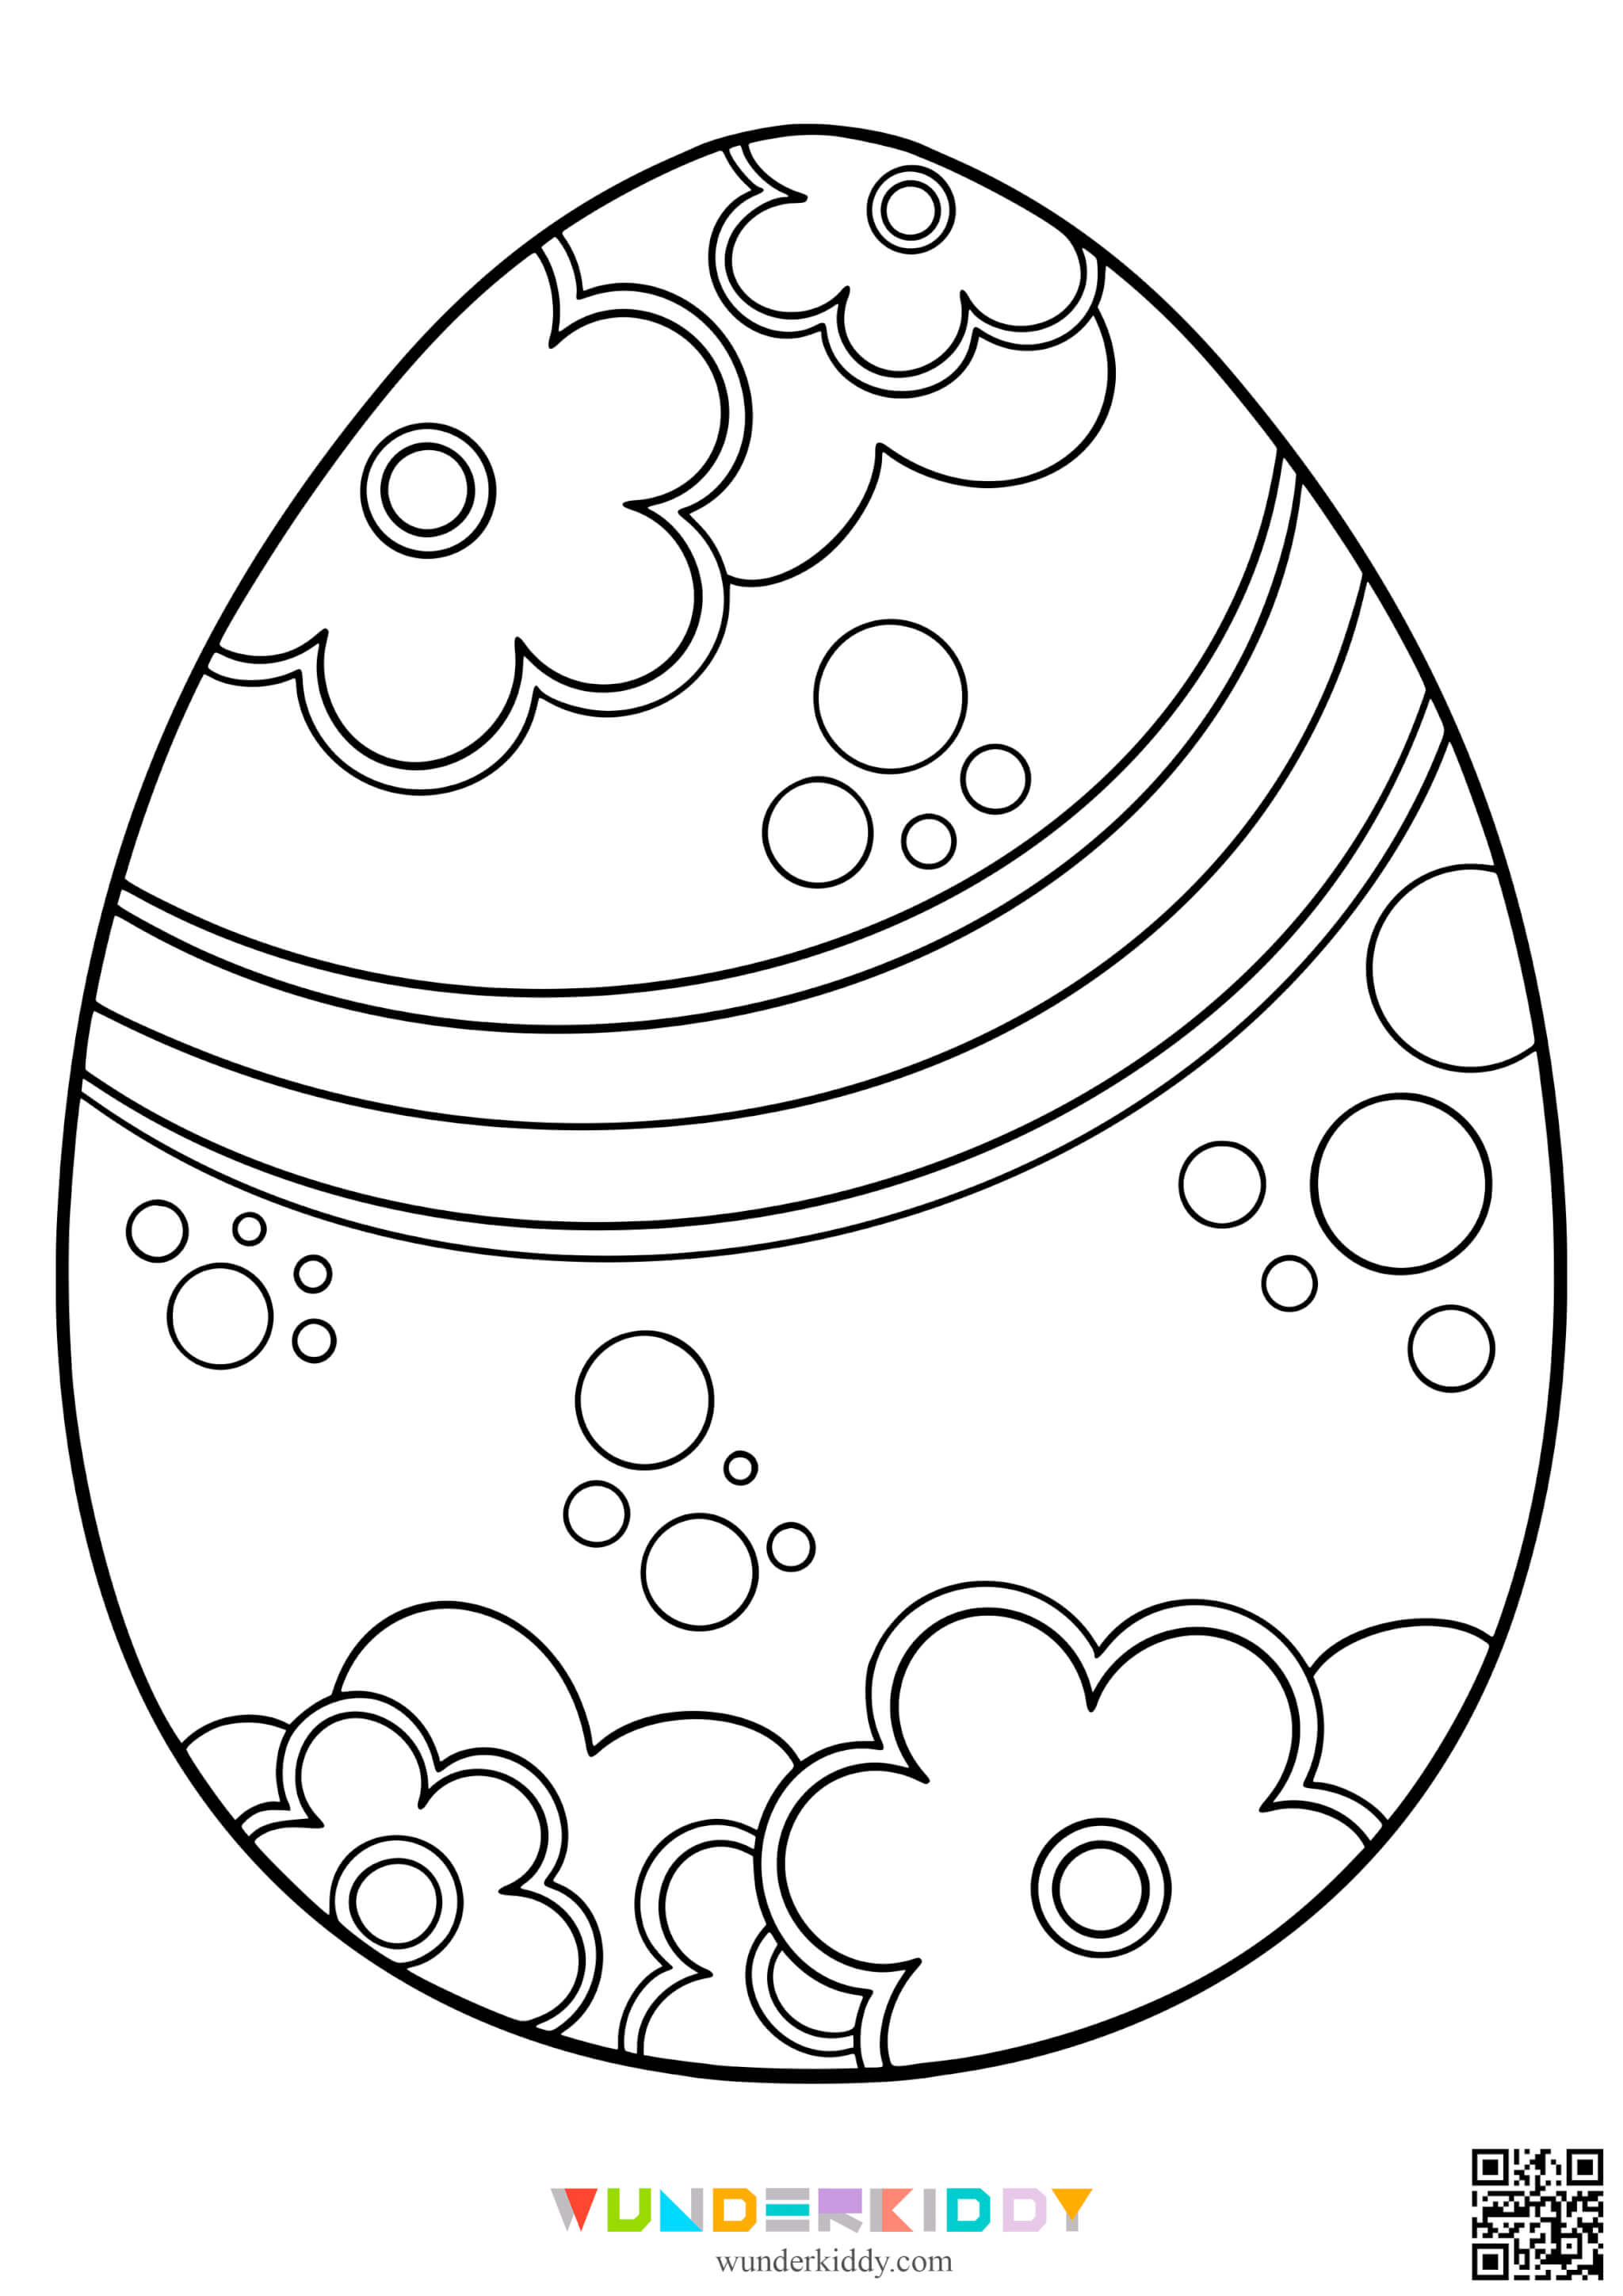 Easter Egg Template Colouring Page - Image 2